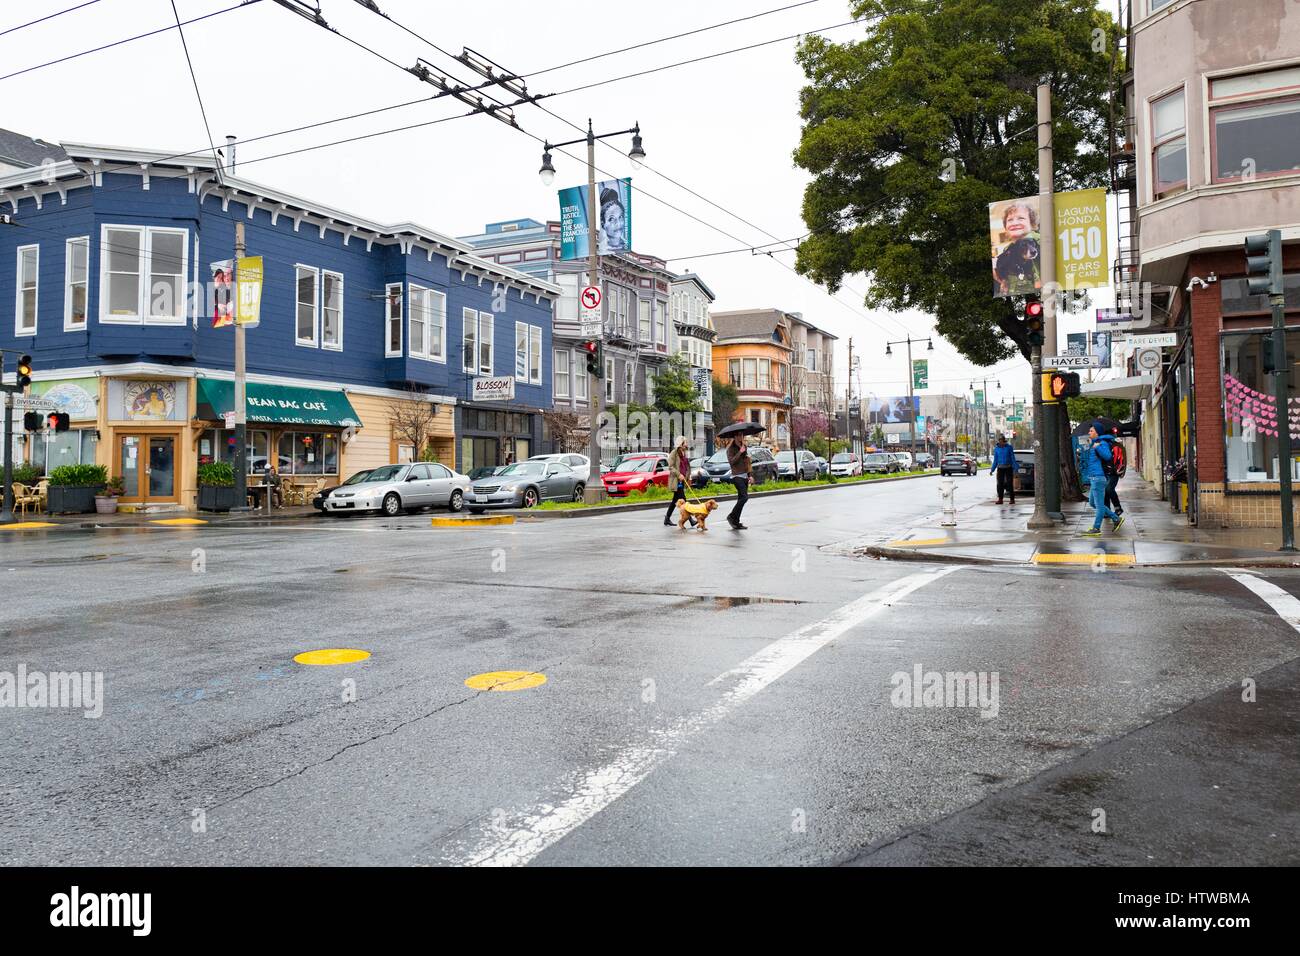 On a rainy day in the North of Panhandle (NoPA) neighborhood of San Francisco, California, people cross at the intersection of Divisadero Street and Hayes Street, February 19, 2017. Stock Photo